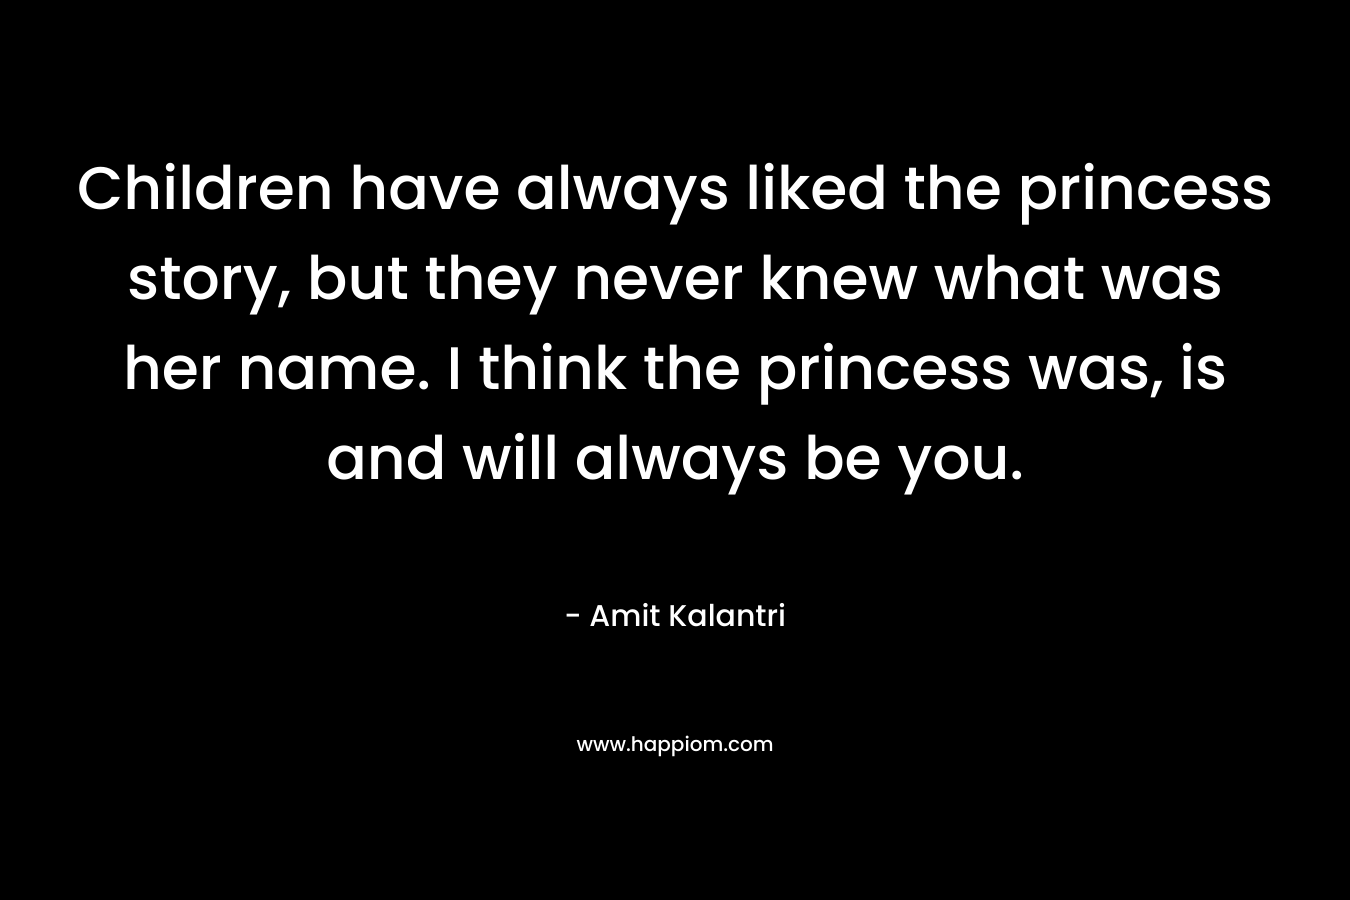 Children have always liked the princess story, but they never knew what was her name. I think the princess was, is and will always be you. – Amit Kalantri